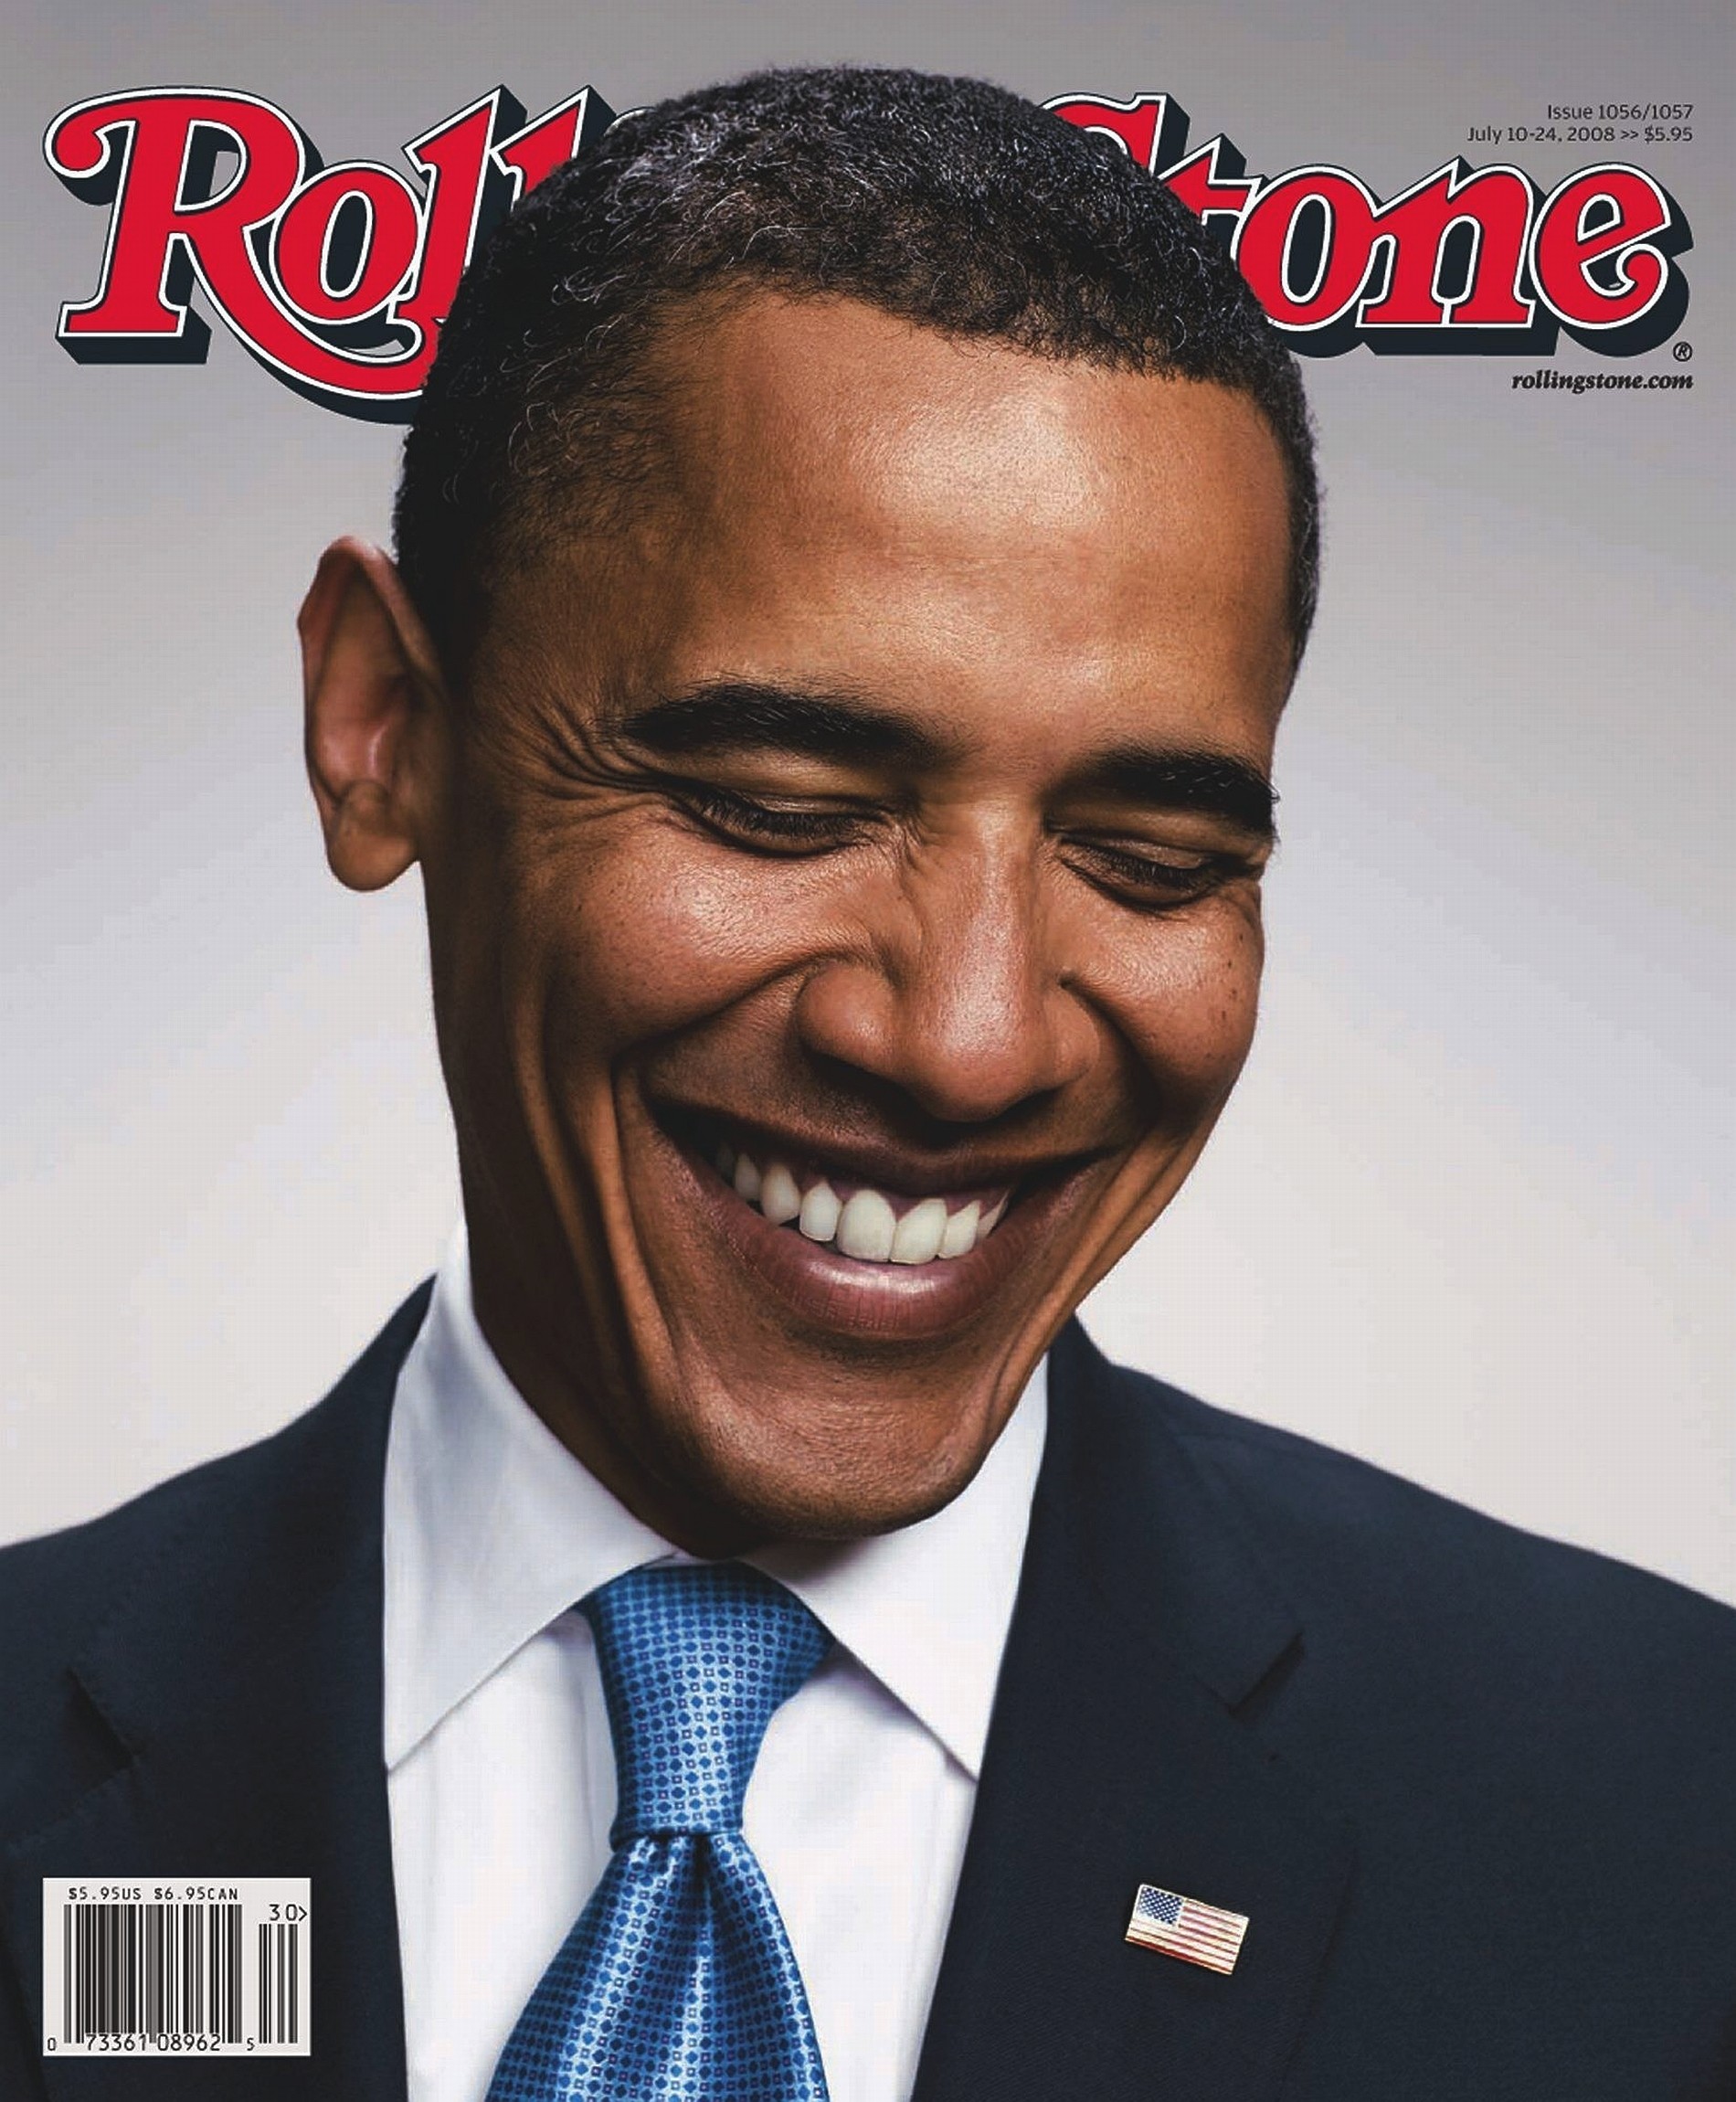 Barack Obama Presidents Of The United States Rolling - Obama Rolling Stone - HD Wallpaper 